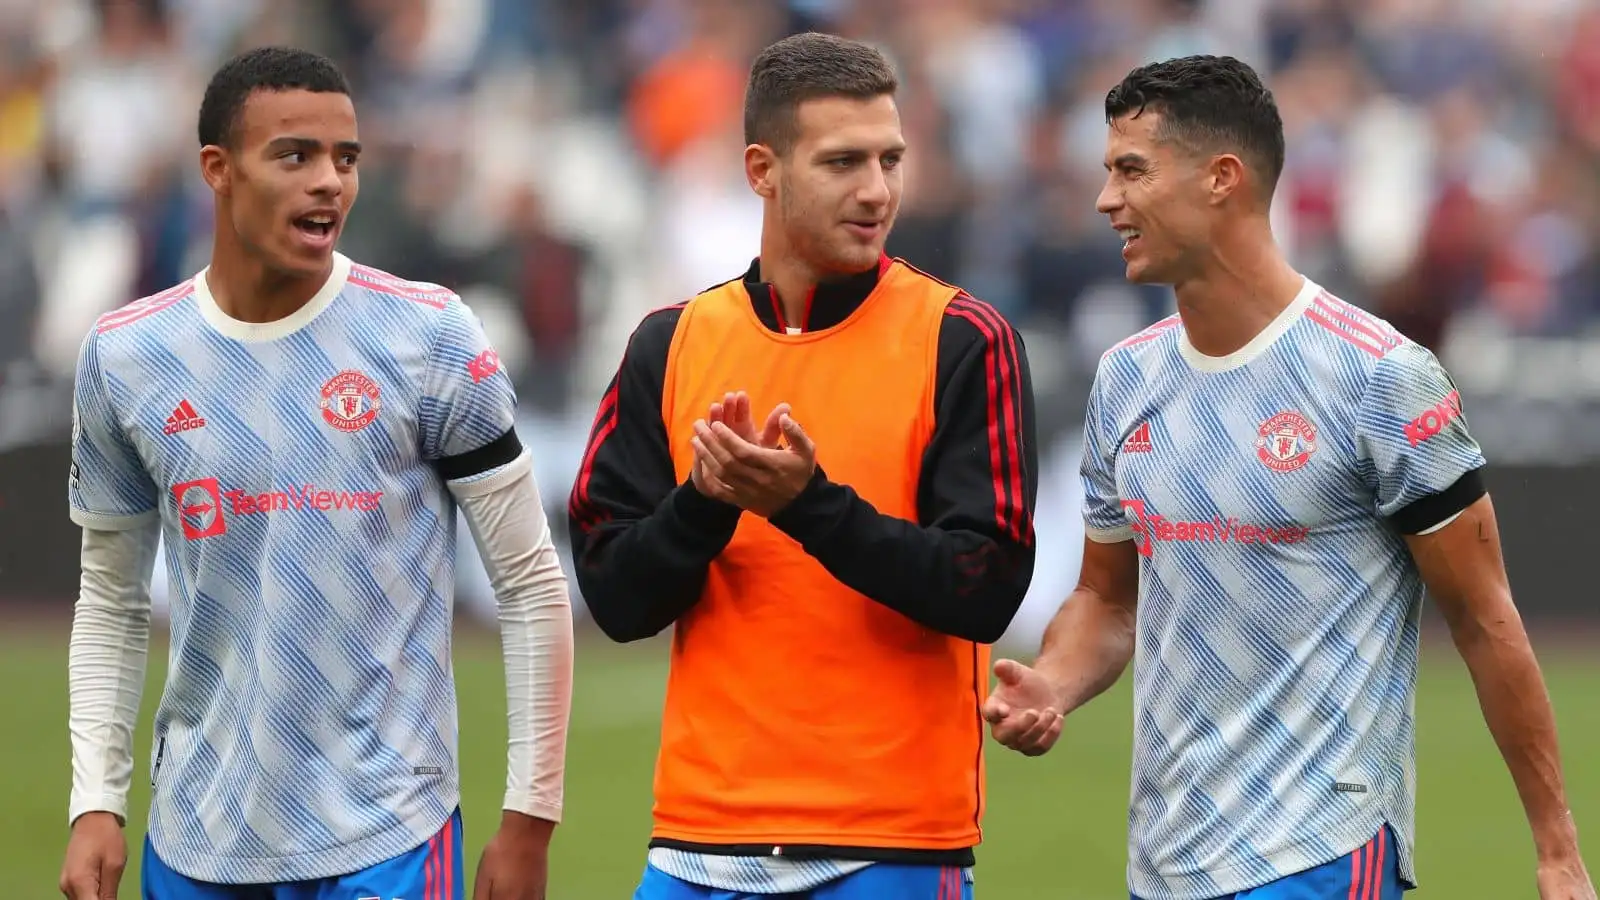 Cristiano Ronaldo of Manchester United is seen with Mason Greenwood (L) and Diogo Dalot (R) - West Ham United v Manchester United, Premier League, London Stadium, London